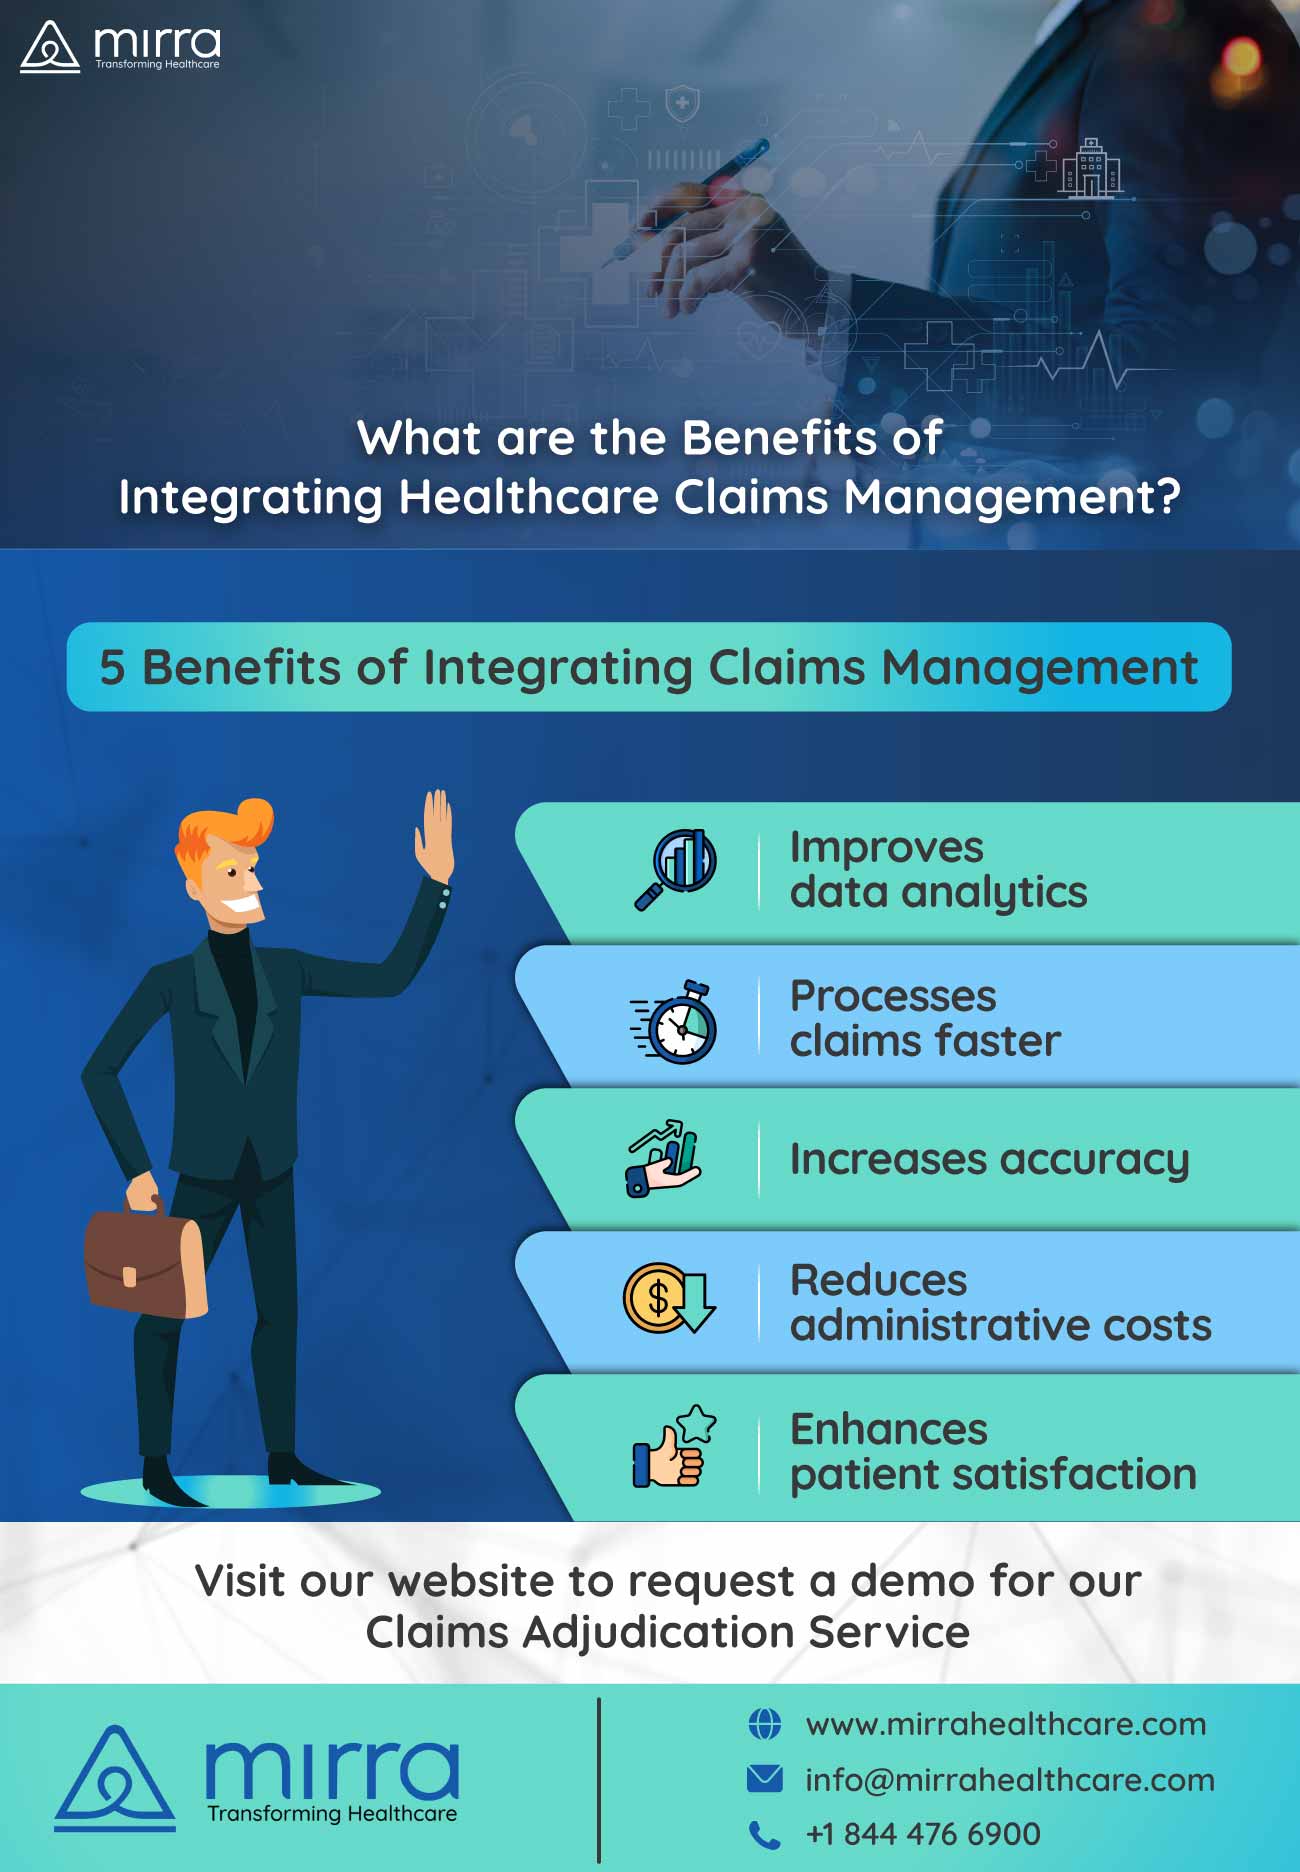 How Can Mirra Healthcare’s Claims Management Service Benefit Your Medical Practice?